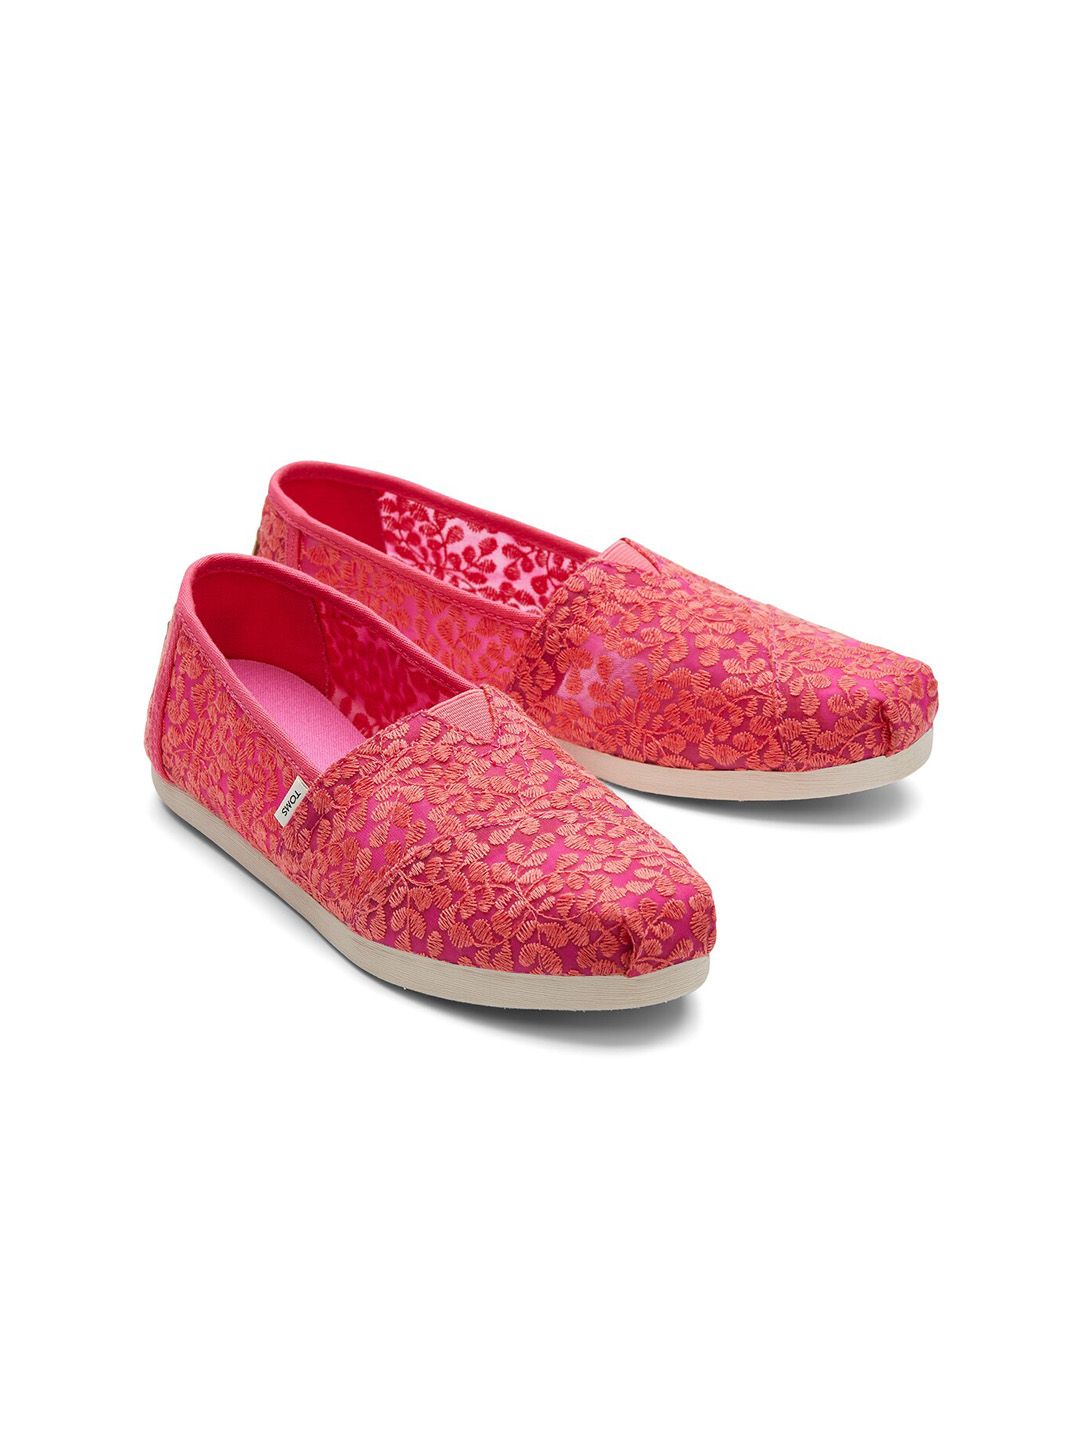 TOMS Women Pink Botanical Lace Alpargata Slip-on Sneakers Price in India